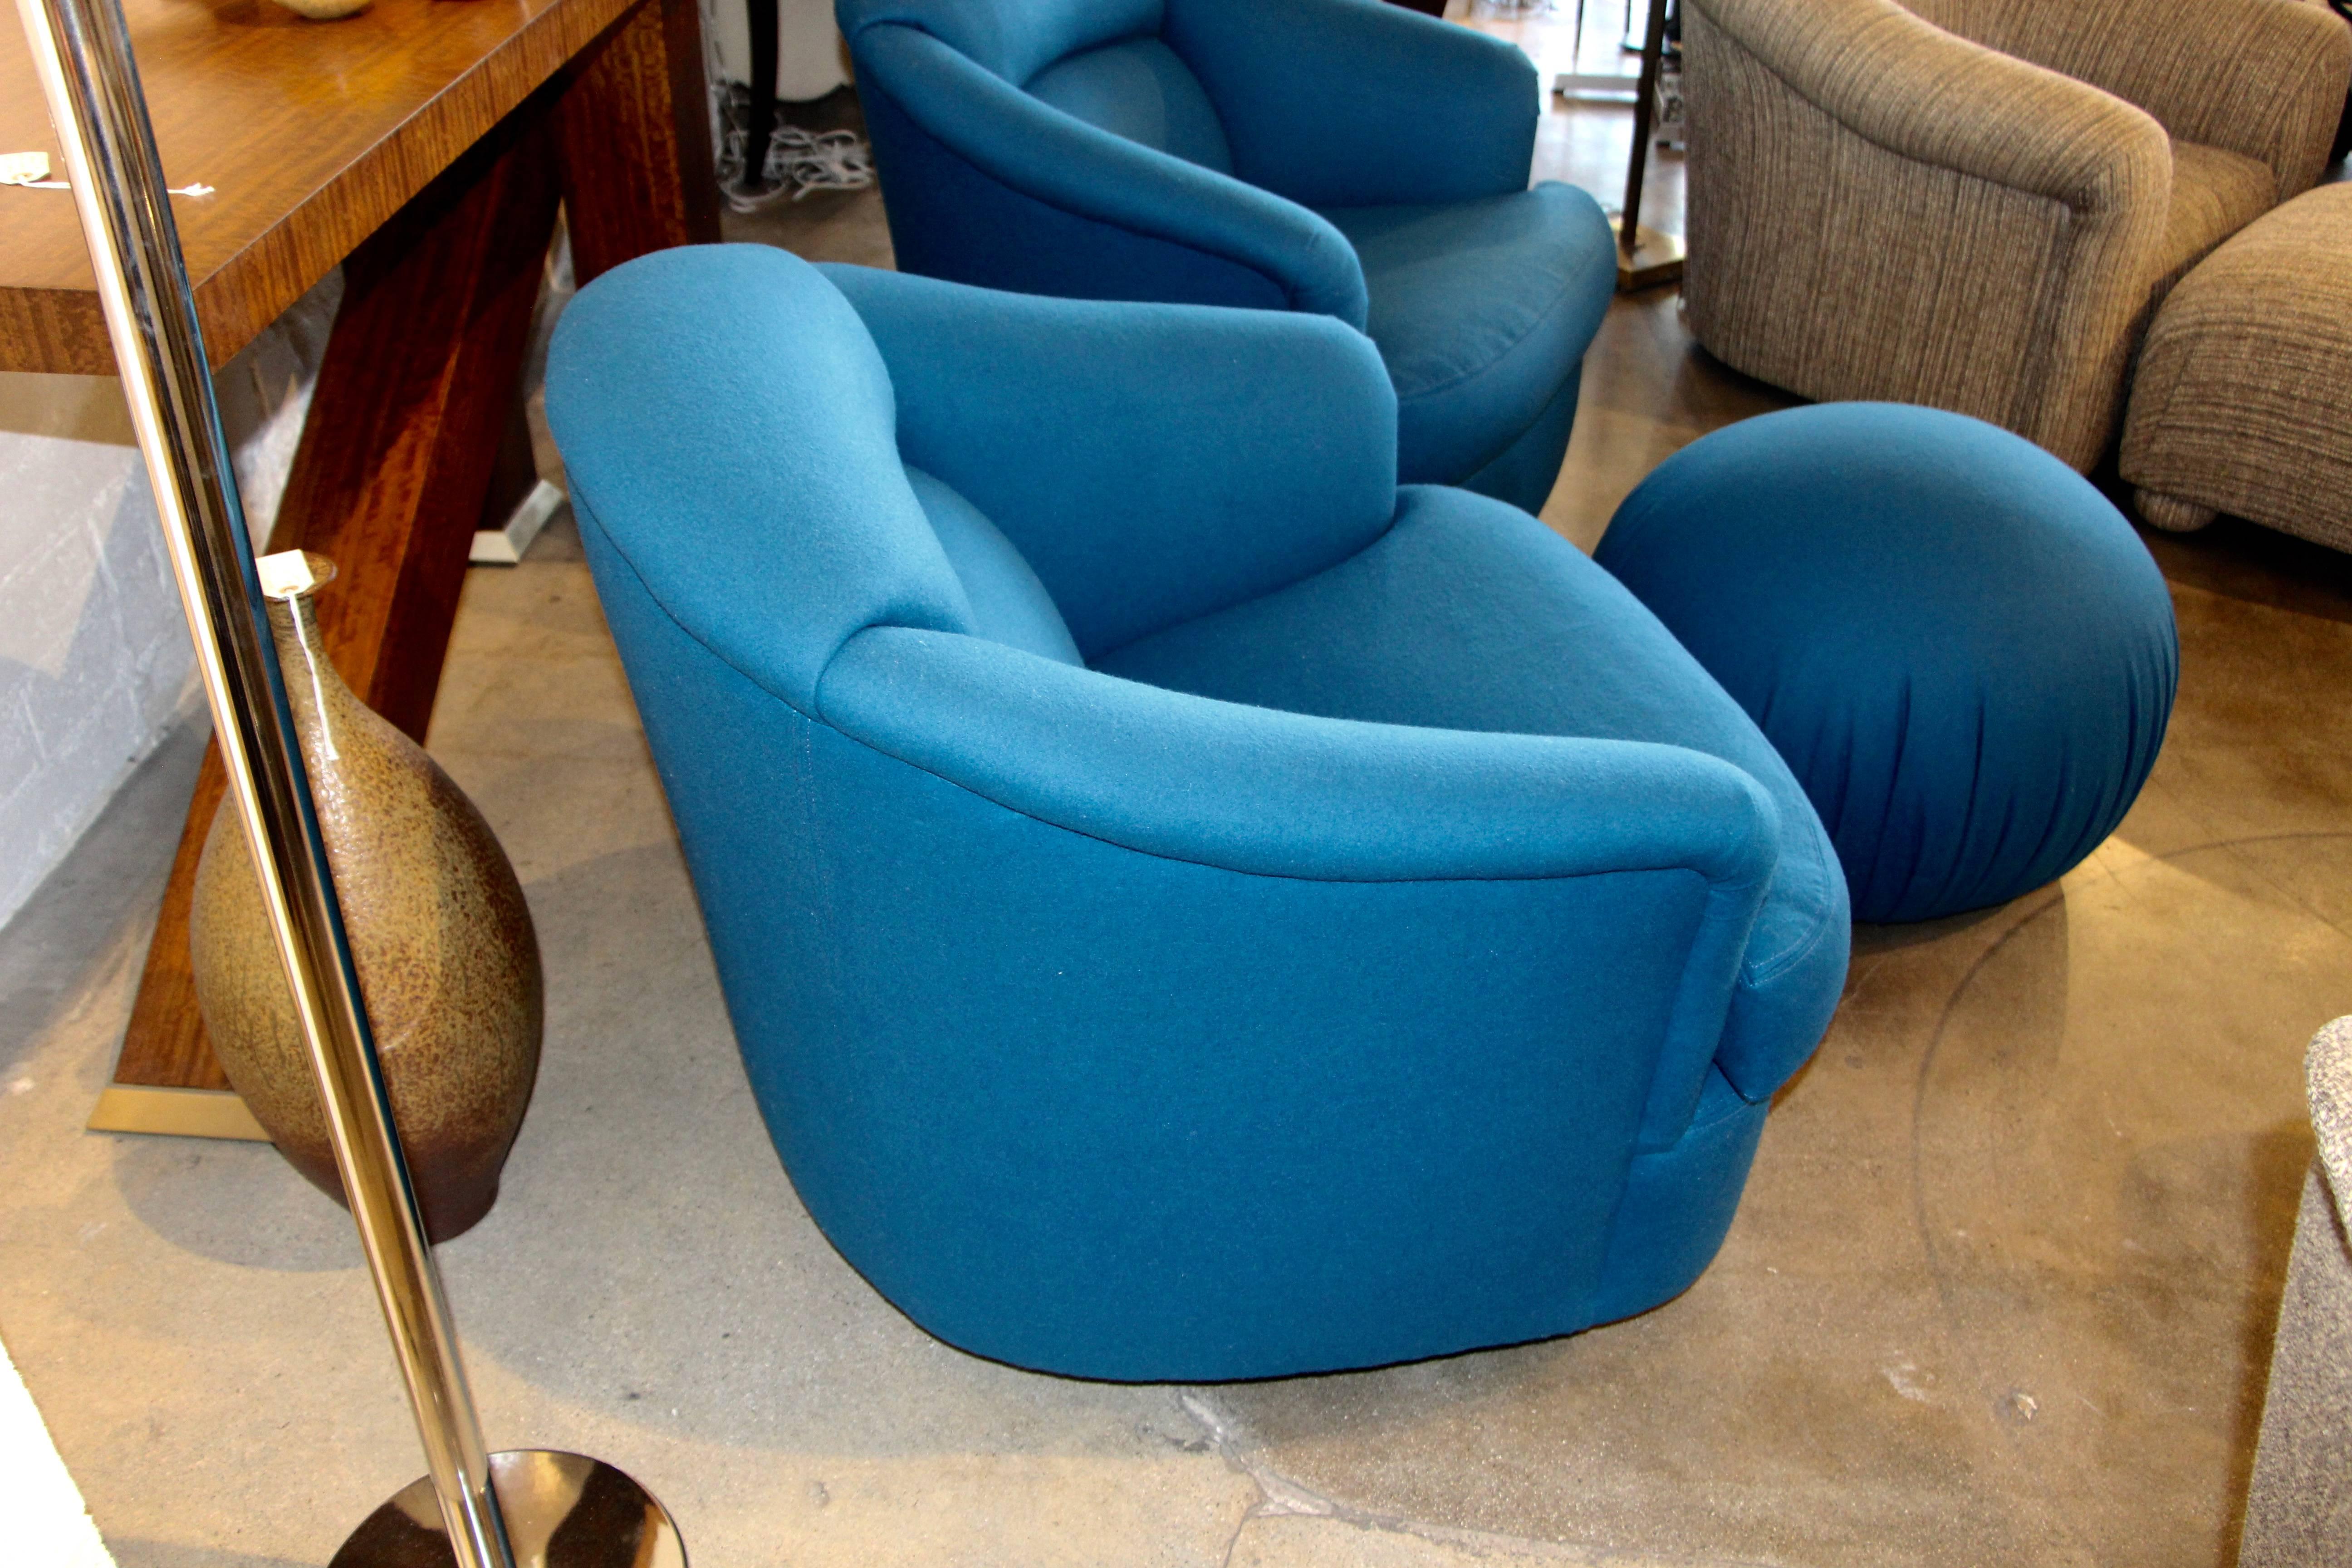 Machine-Made Pair of Chairs with Ottoman from Directional